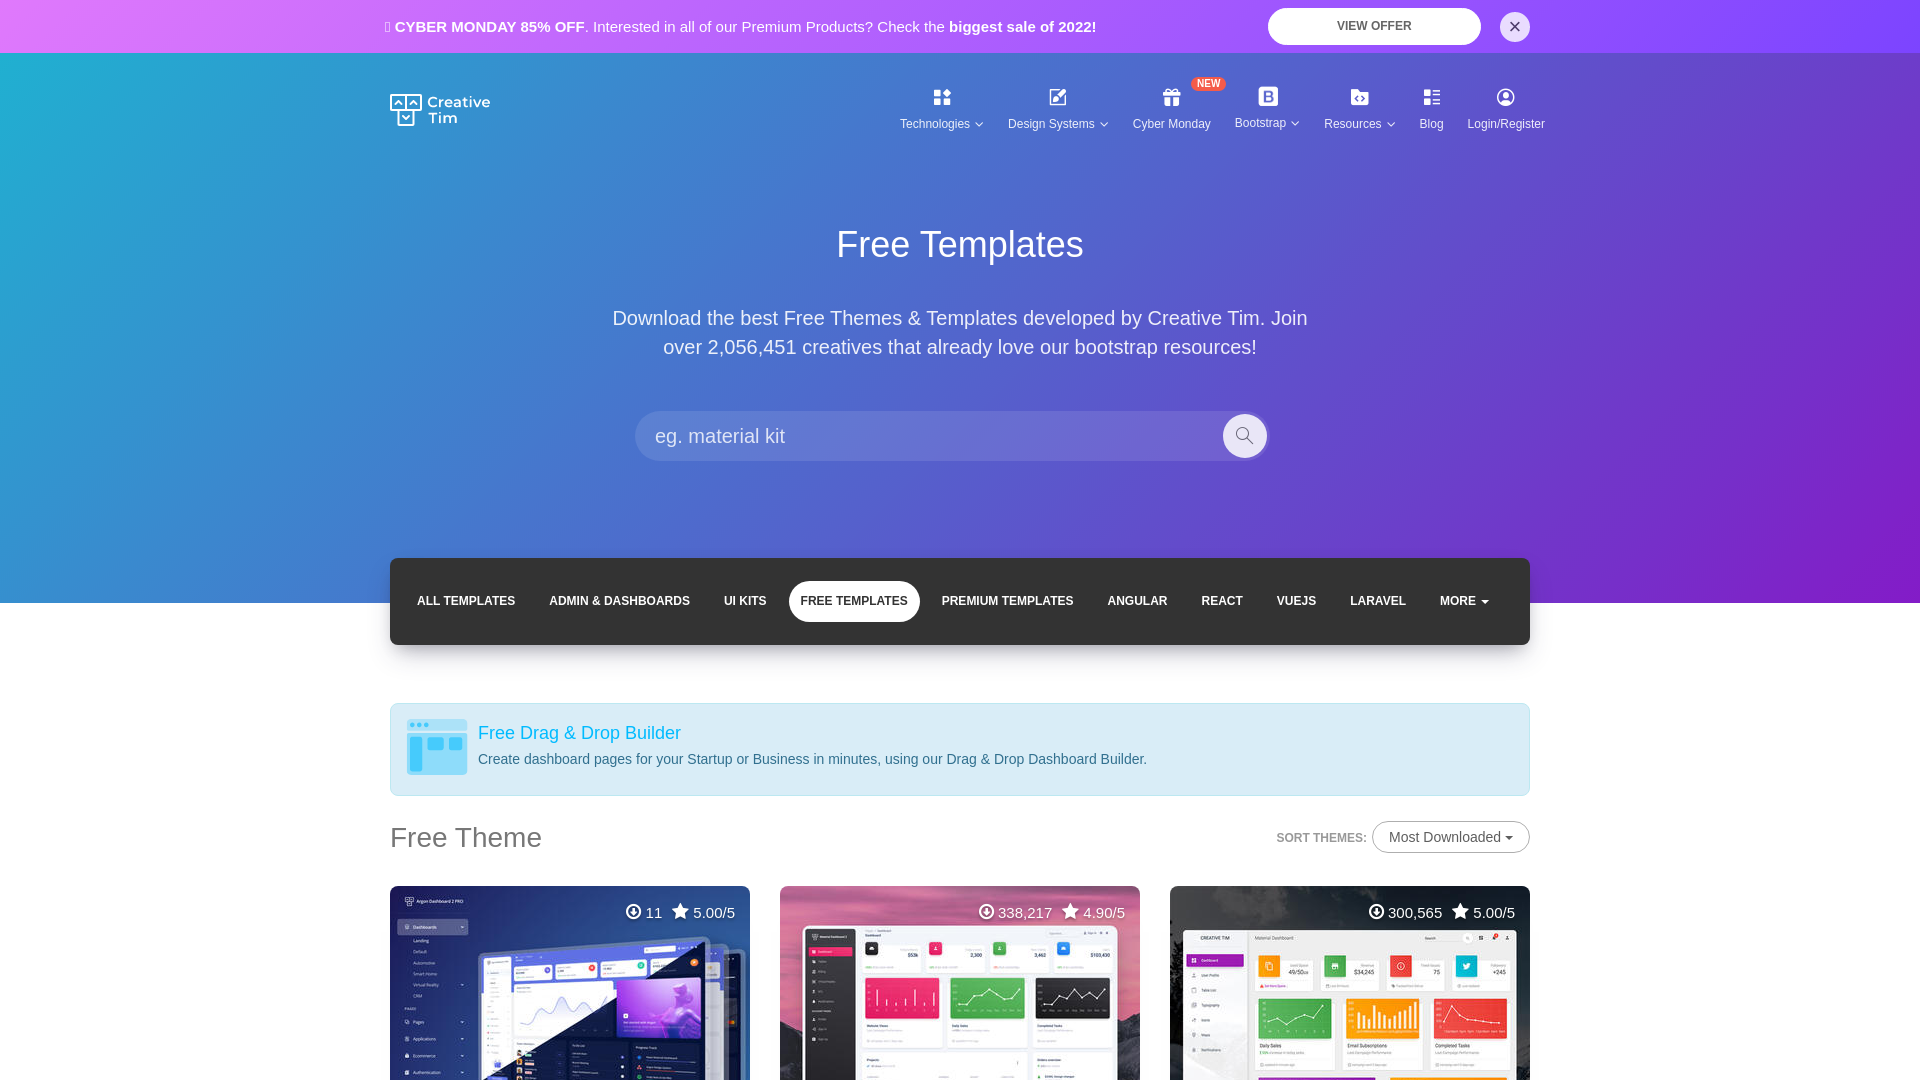 Best Sites to Download Free Static Web Templates - HTML, Tailwind, Bootstrap, Next.js and React